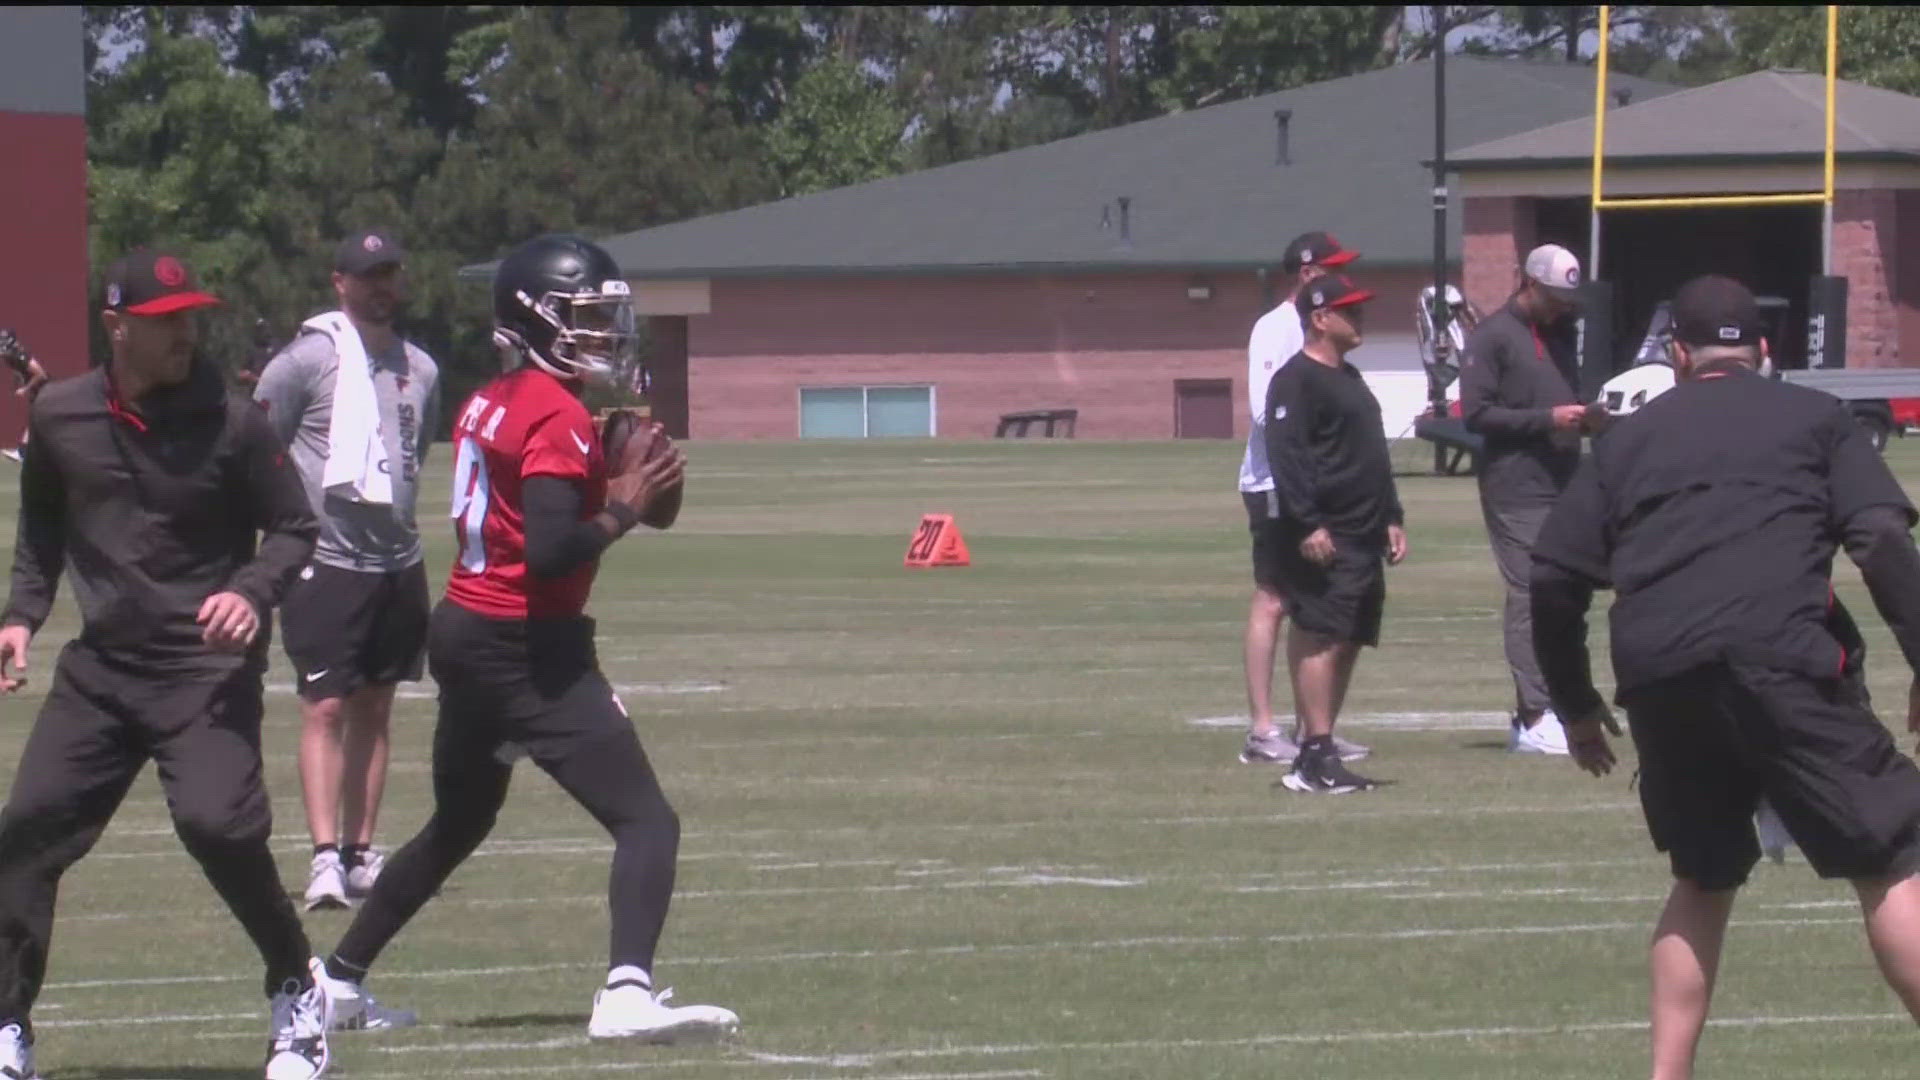 The Falcons' rookie minicamp is taking place in Flowery Branch. Michael Penix Jr. and free agent rookie John Paddock from Illinois are there.